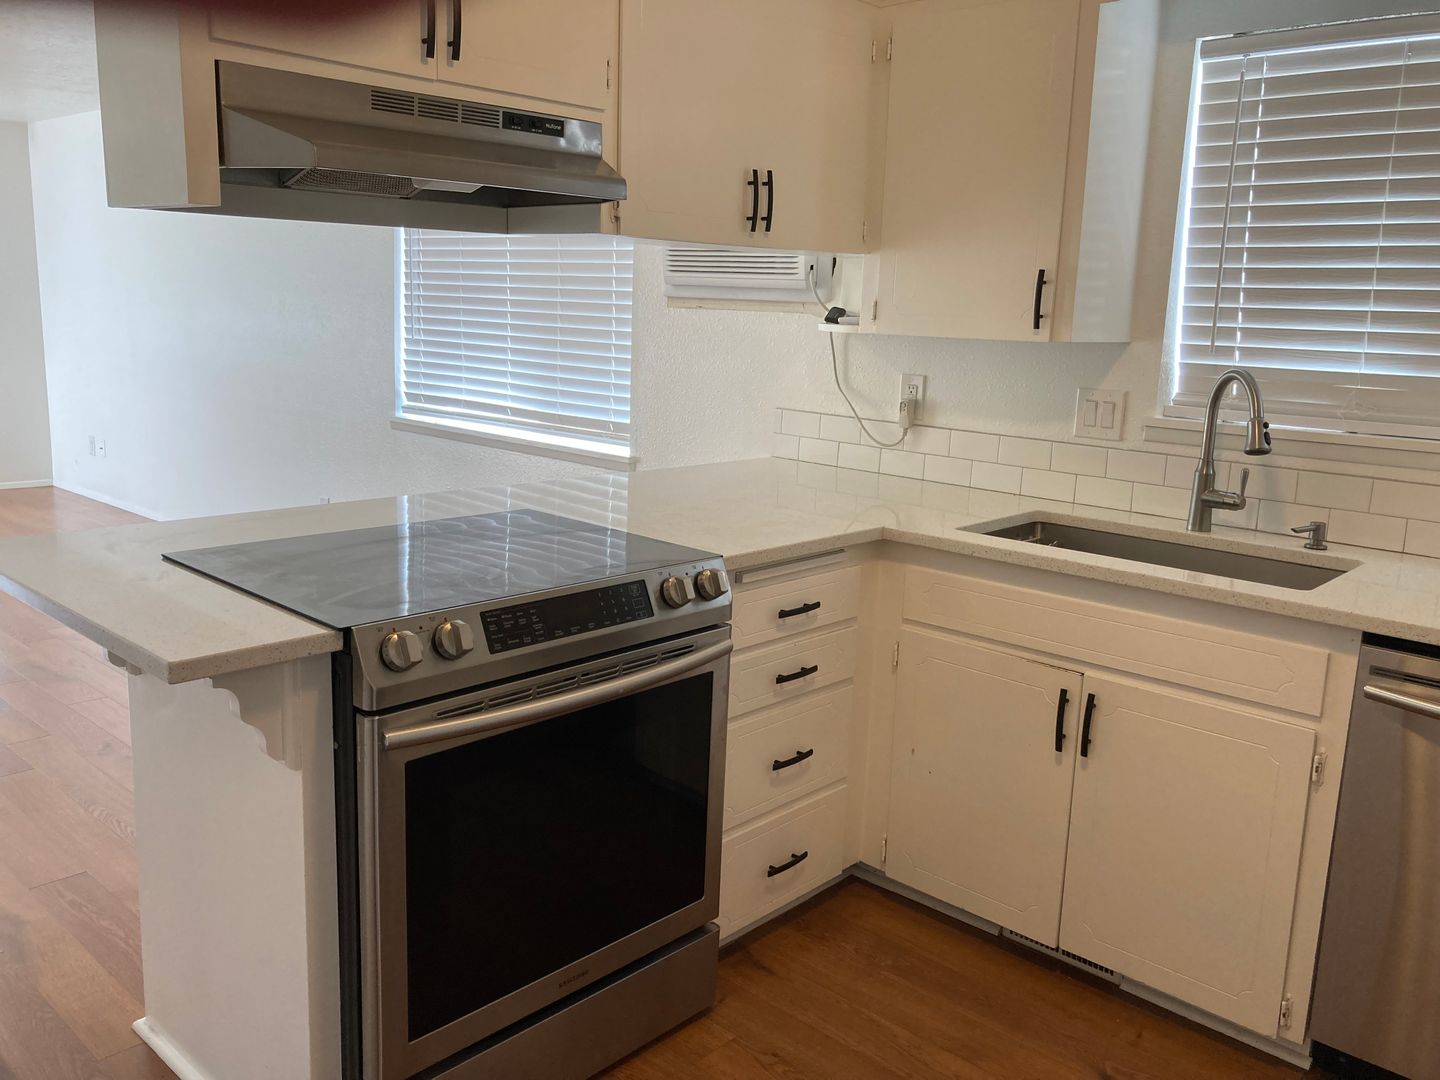 Recently Remodeled  2 Bedroom 1 Bath  Unit of a Duplex